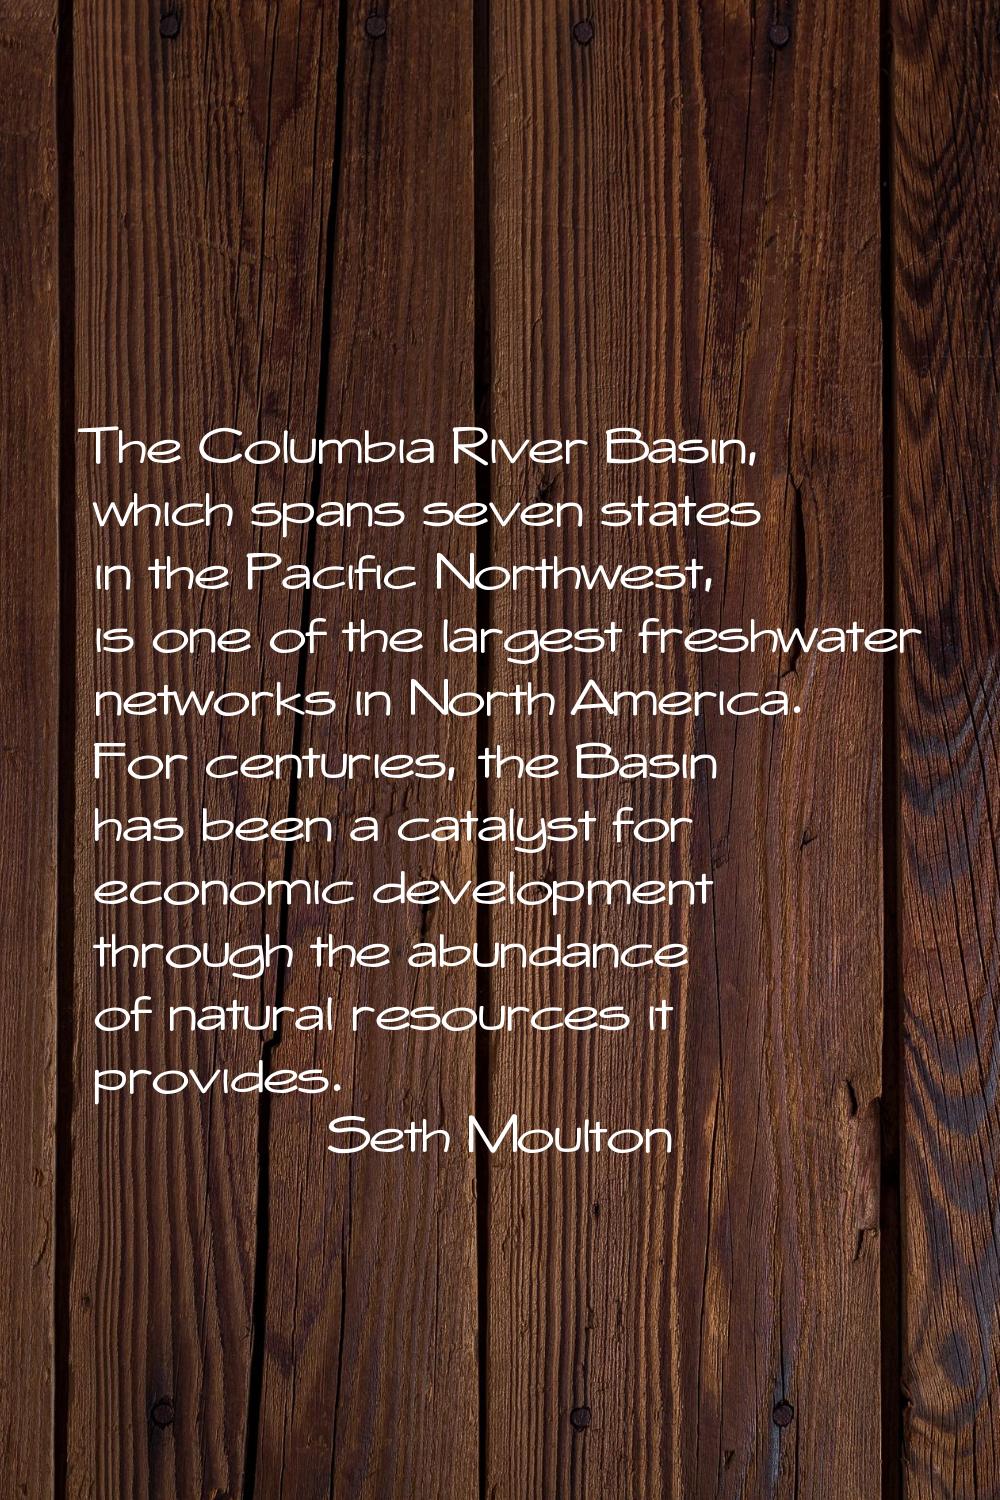 The Columbia River Basin, which spans seven states in the Pacific Northwest, is one of the largest 